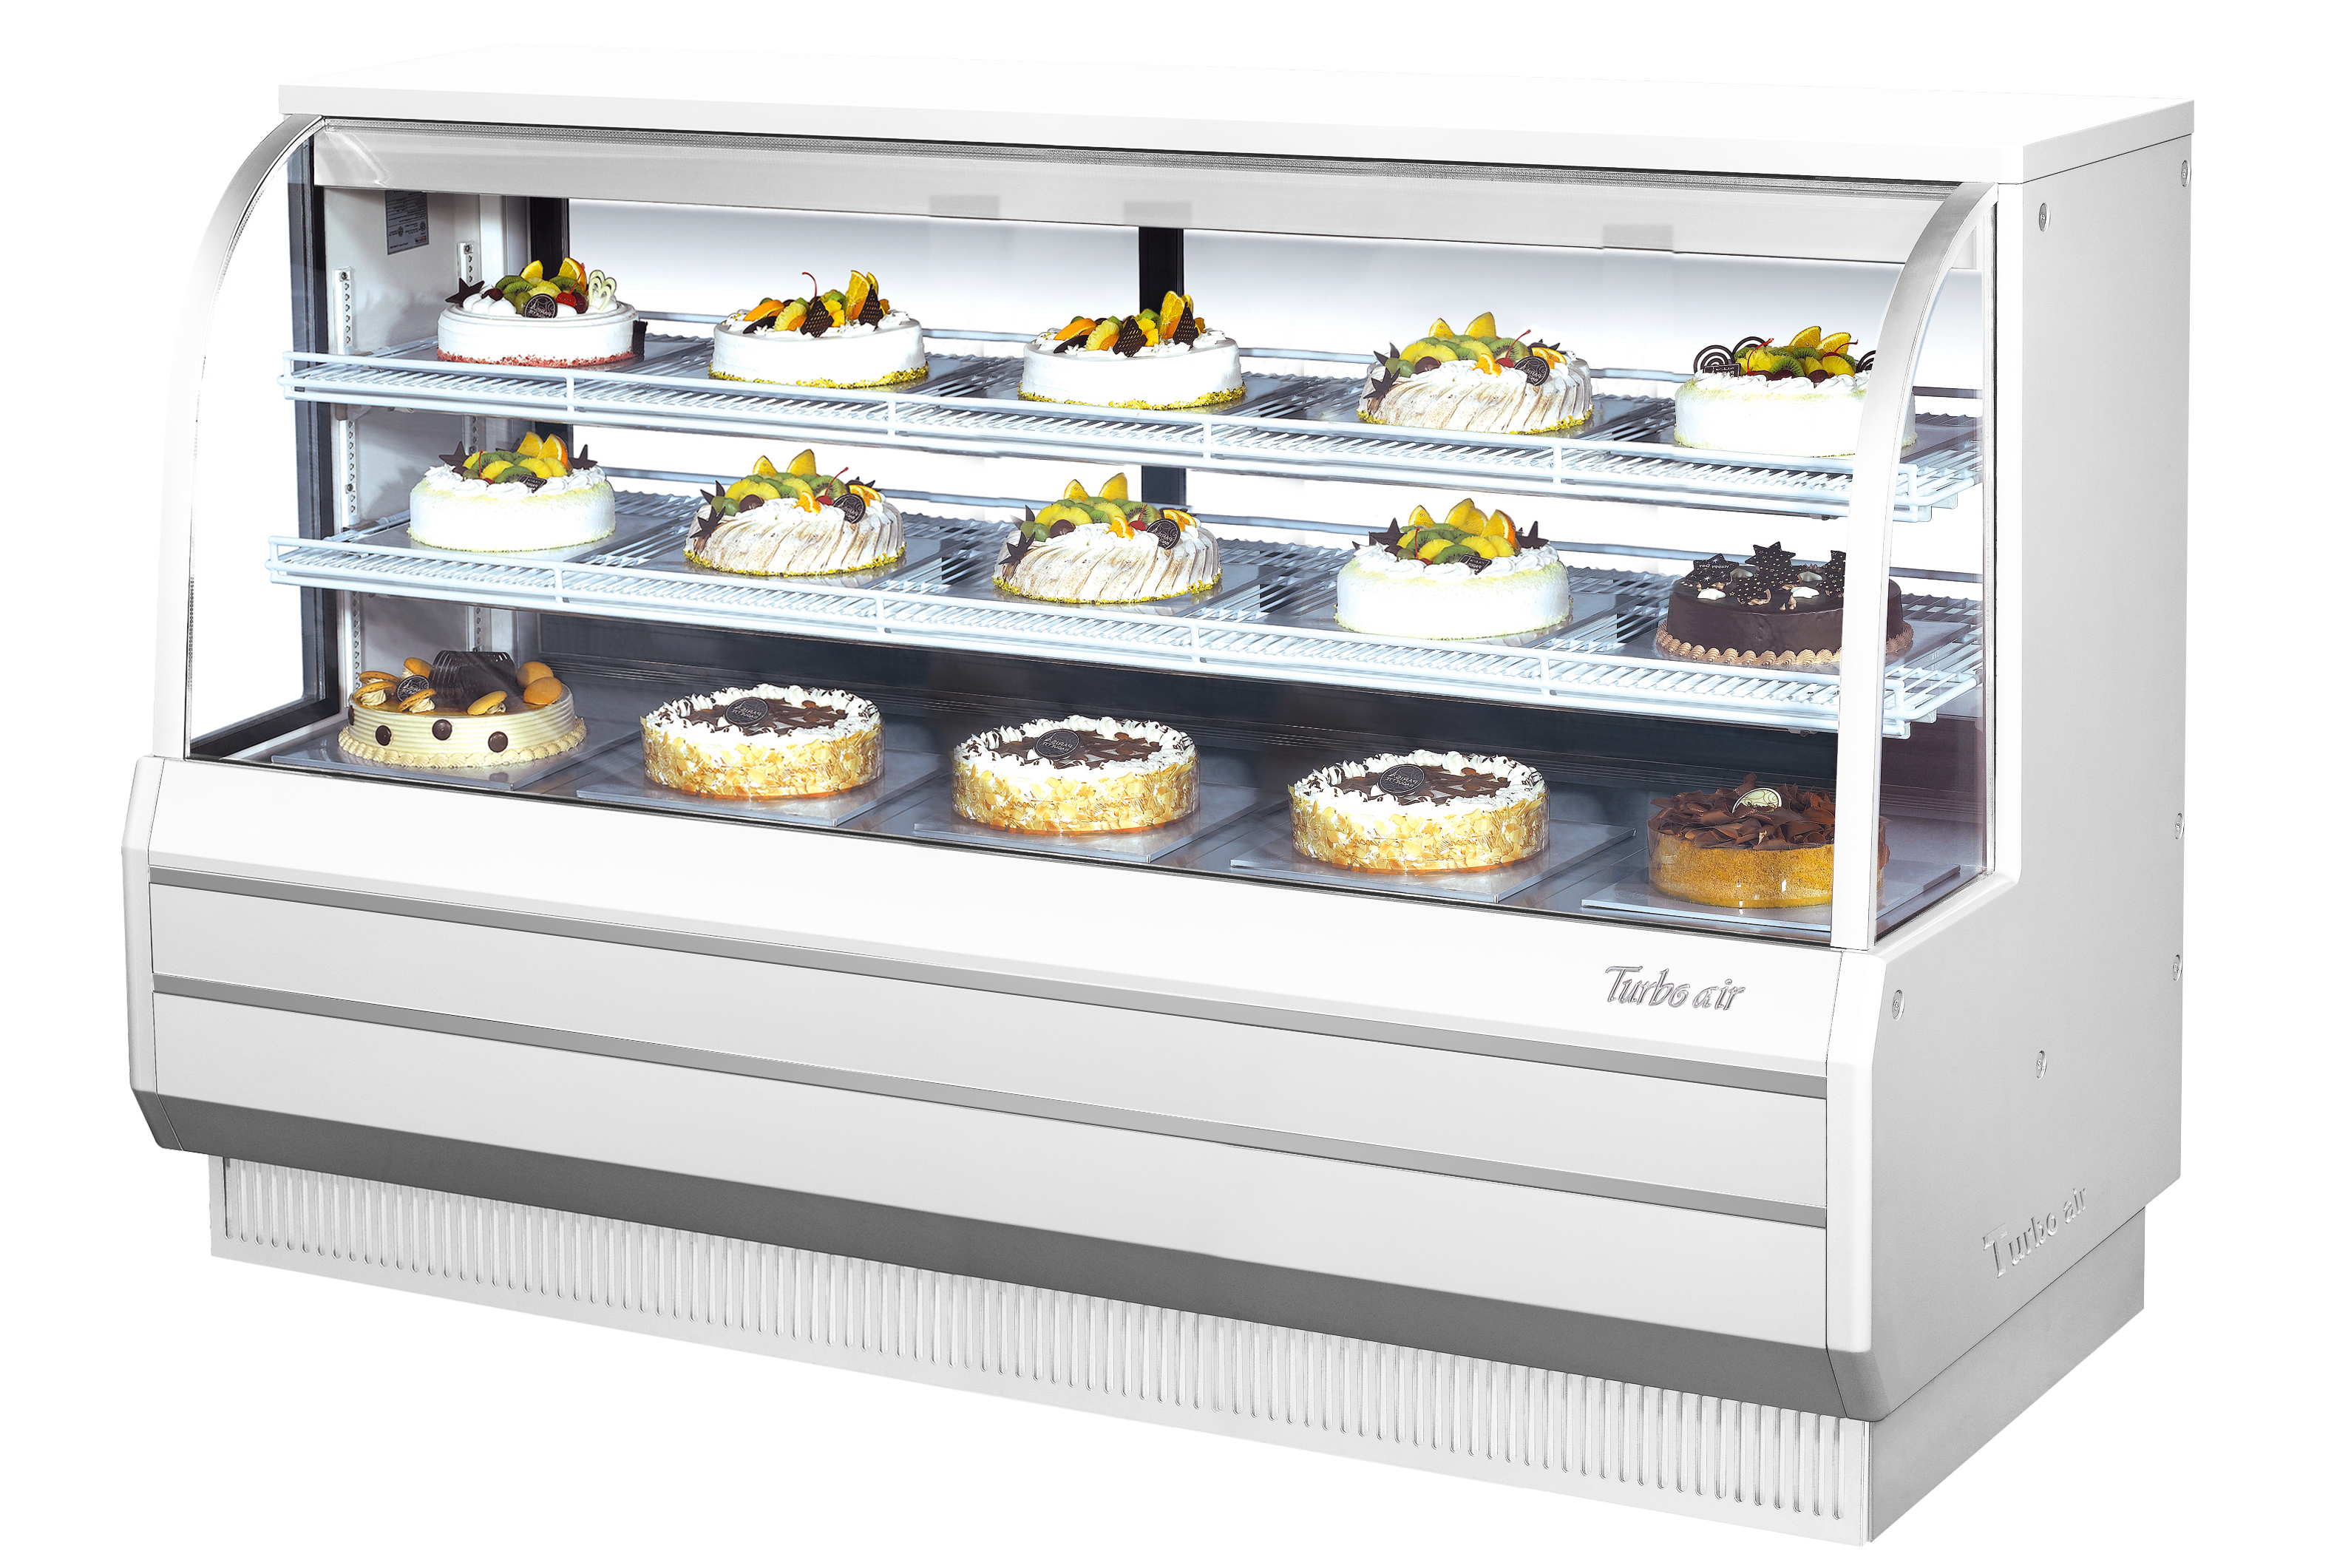 Bakery Case, refrigerated, 22.7 cu.ft